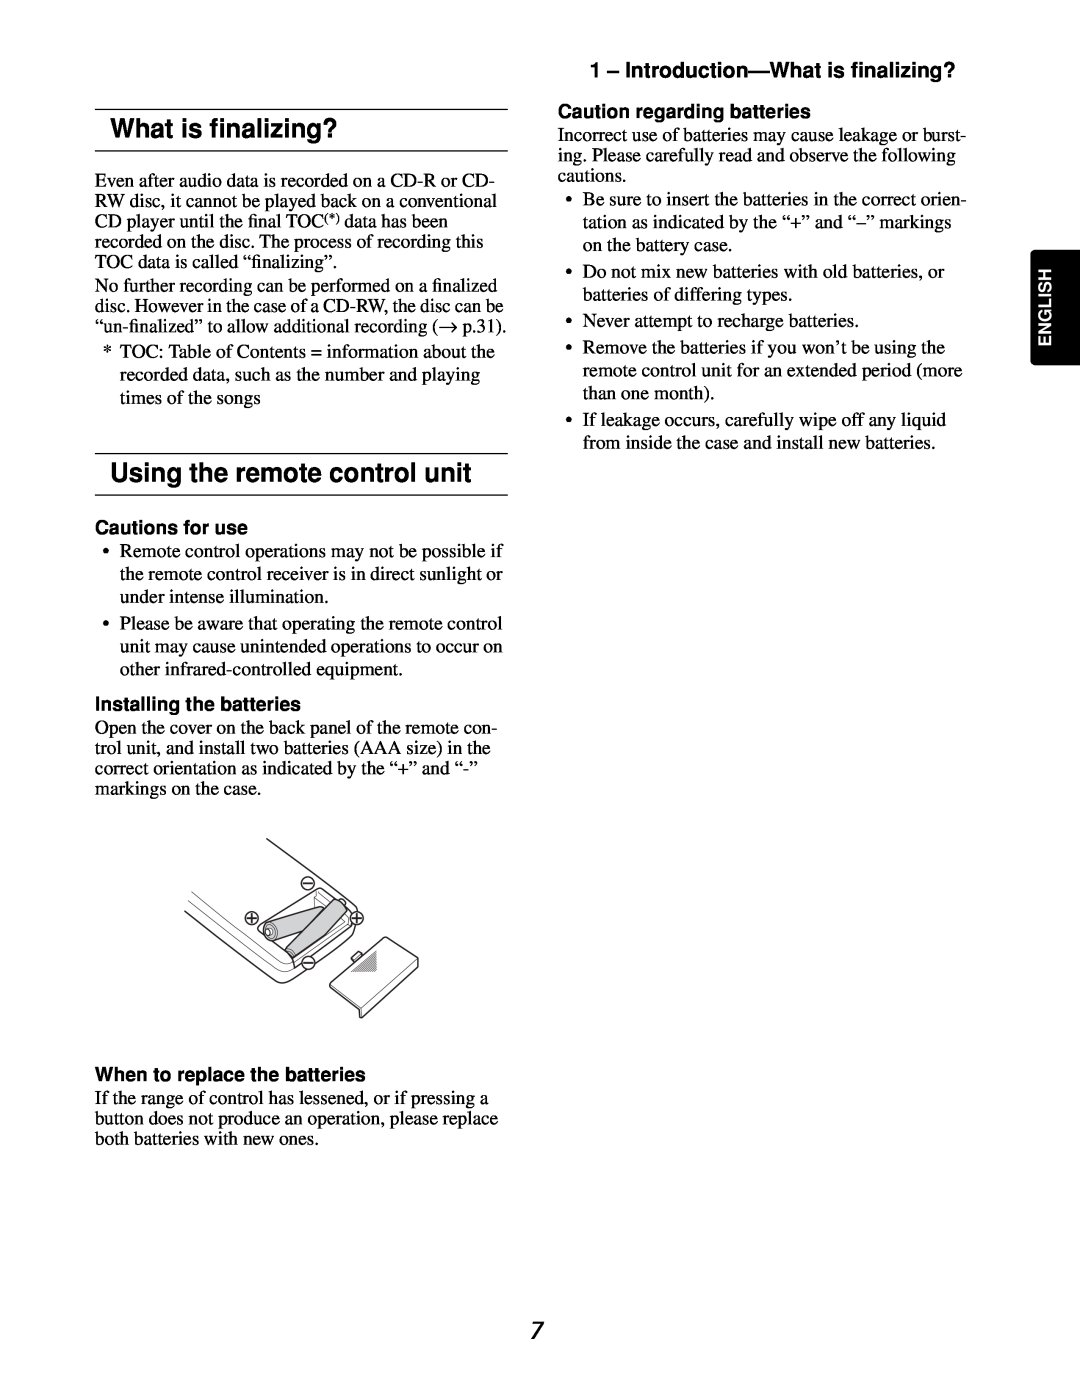 Marantz CDR632 manual What is ﬁnalizing?, Using the remote control unit, Introduction-Whatis finalizing?, Cautions for use 